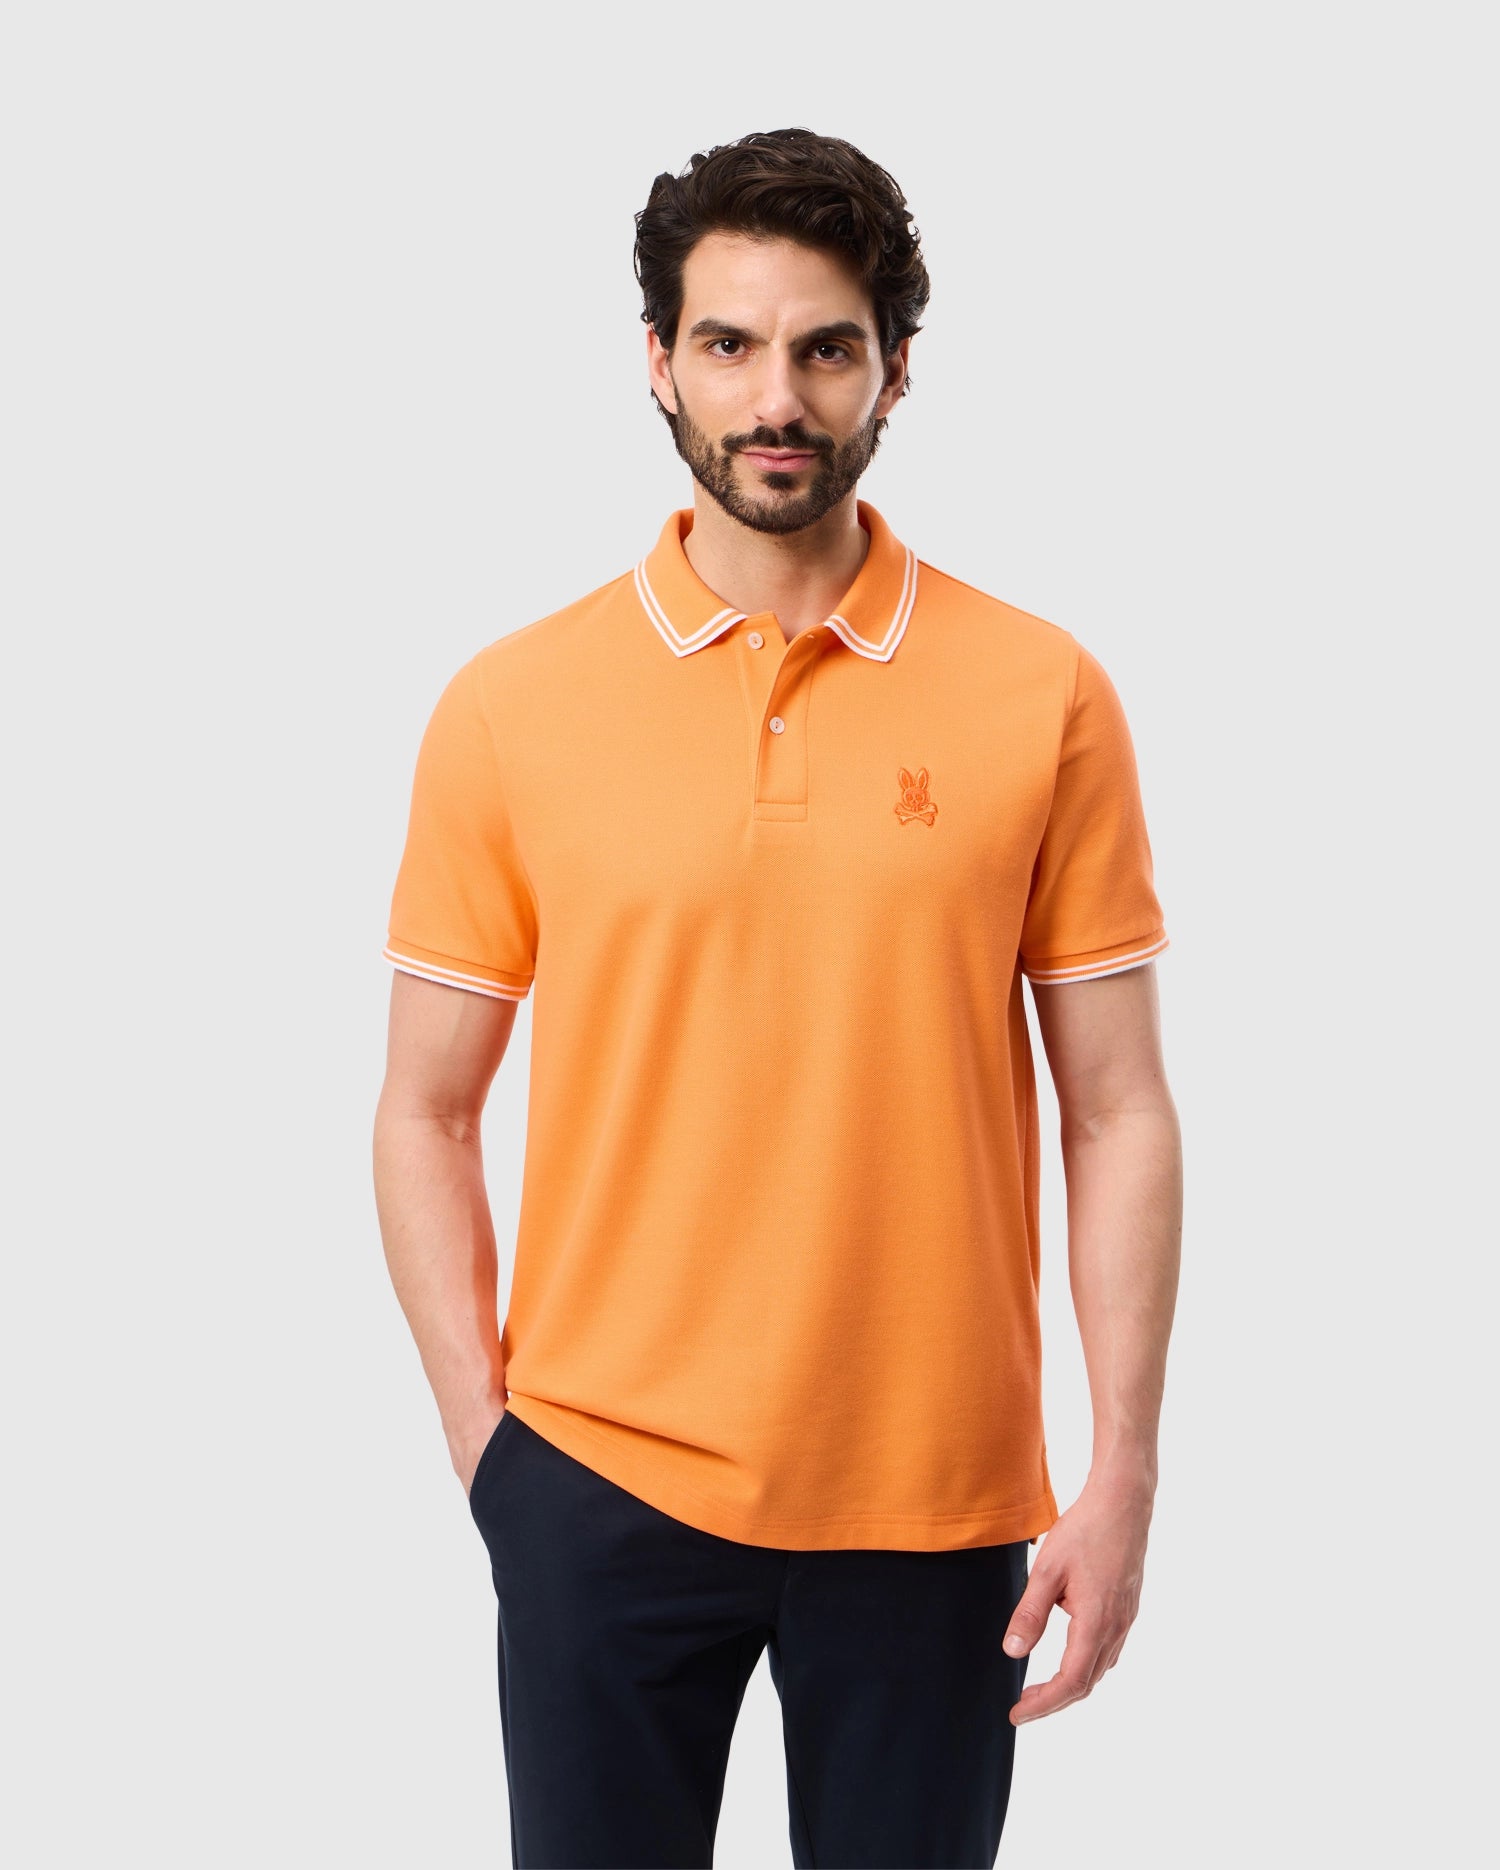 A man with dark hair and a beard is wearing an orange Psycho Bunny MENS BELTON PIQUE POLO - B6K575C200 with white trim on the collar and sleeves. The Pima cotton shirt features an embroidered Bunny logo on the chest. He stands against a plain white background with his hands in his pockets.